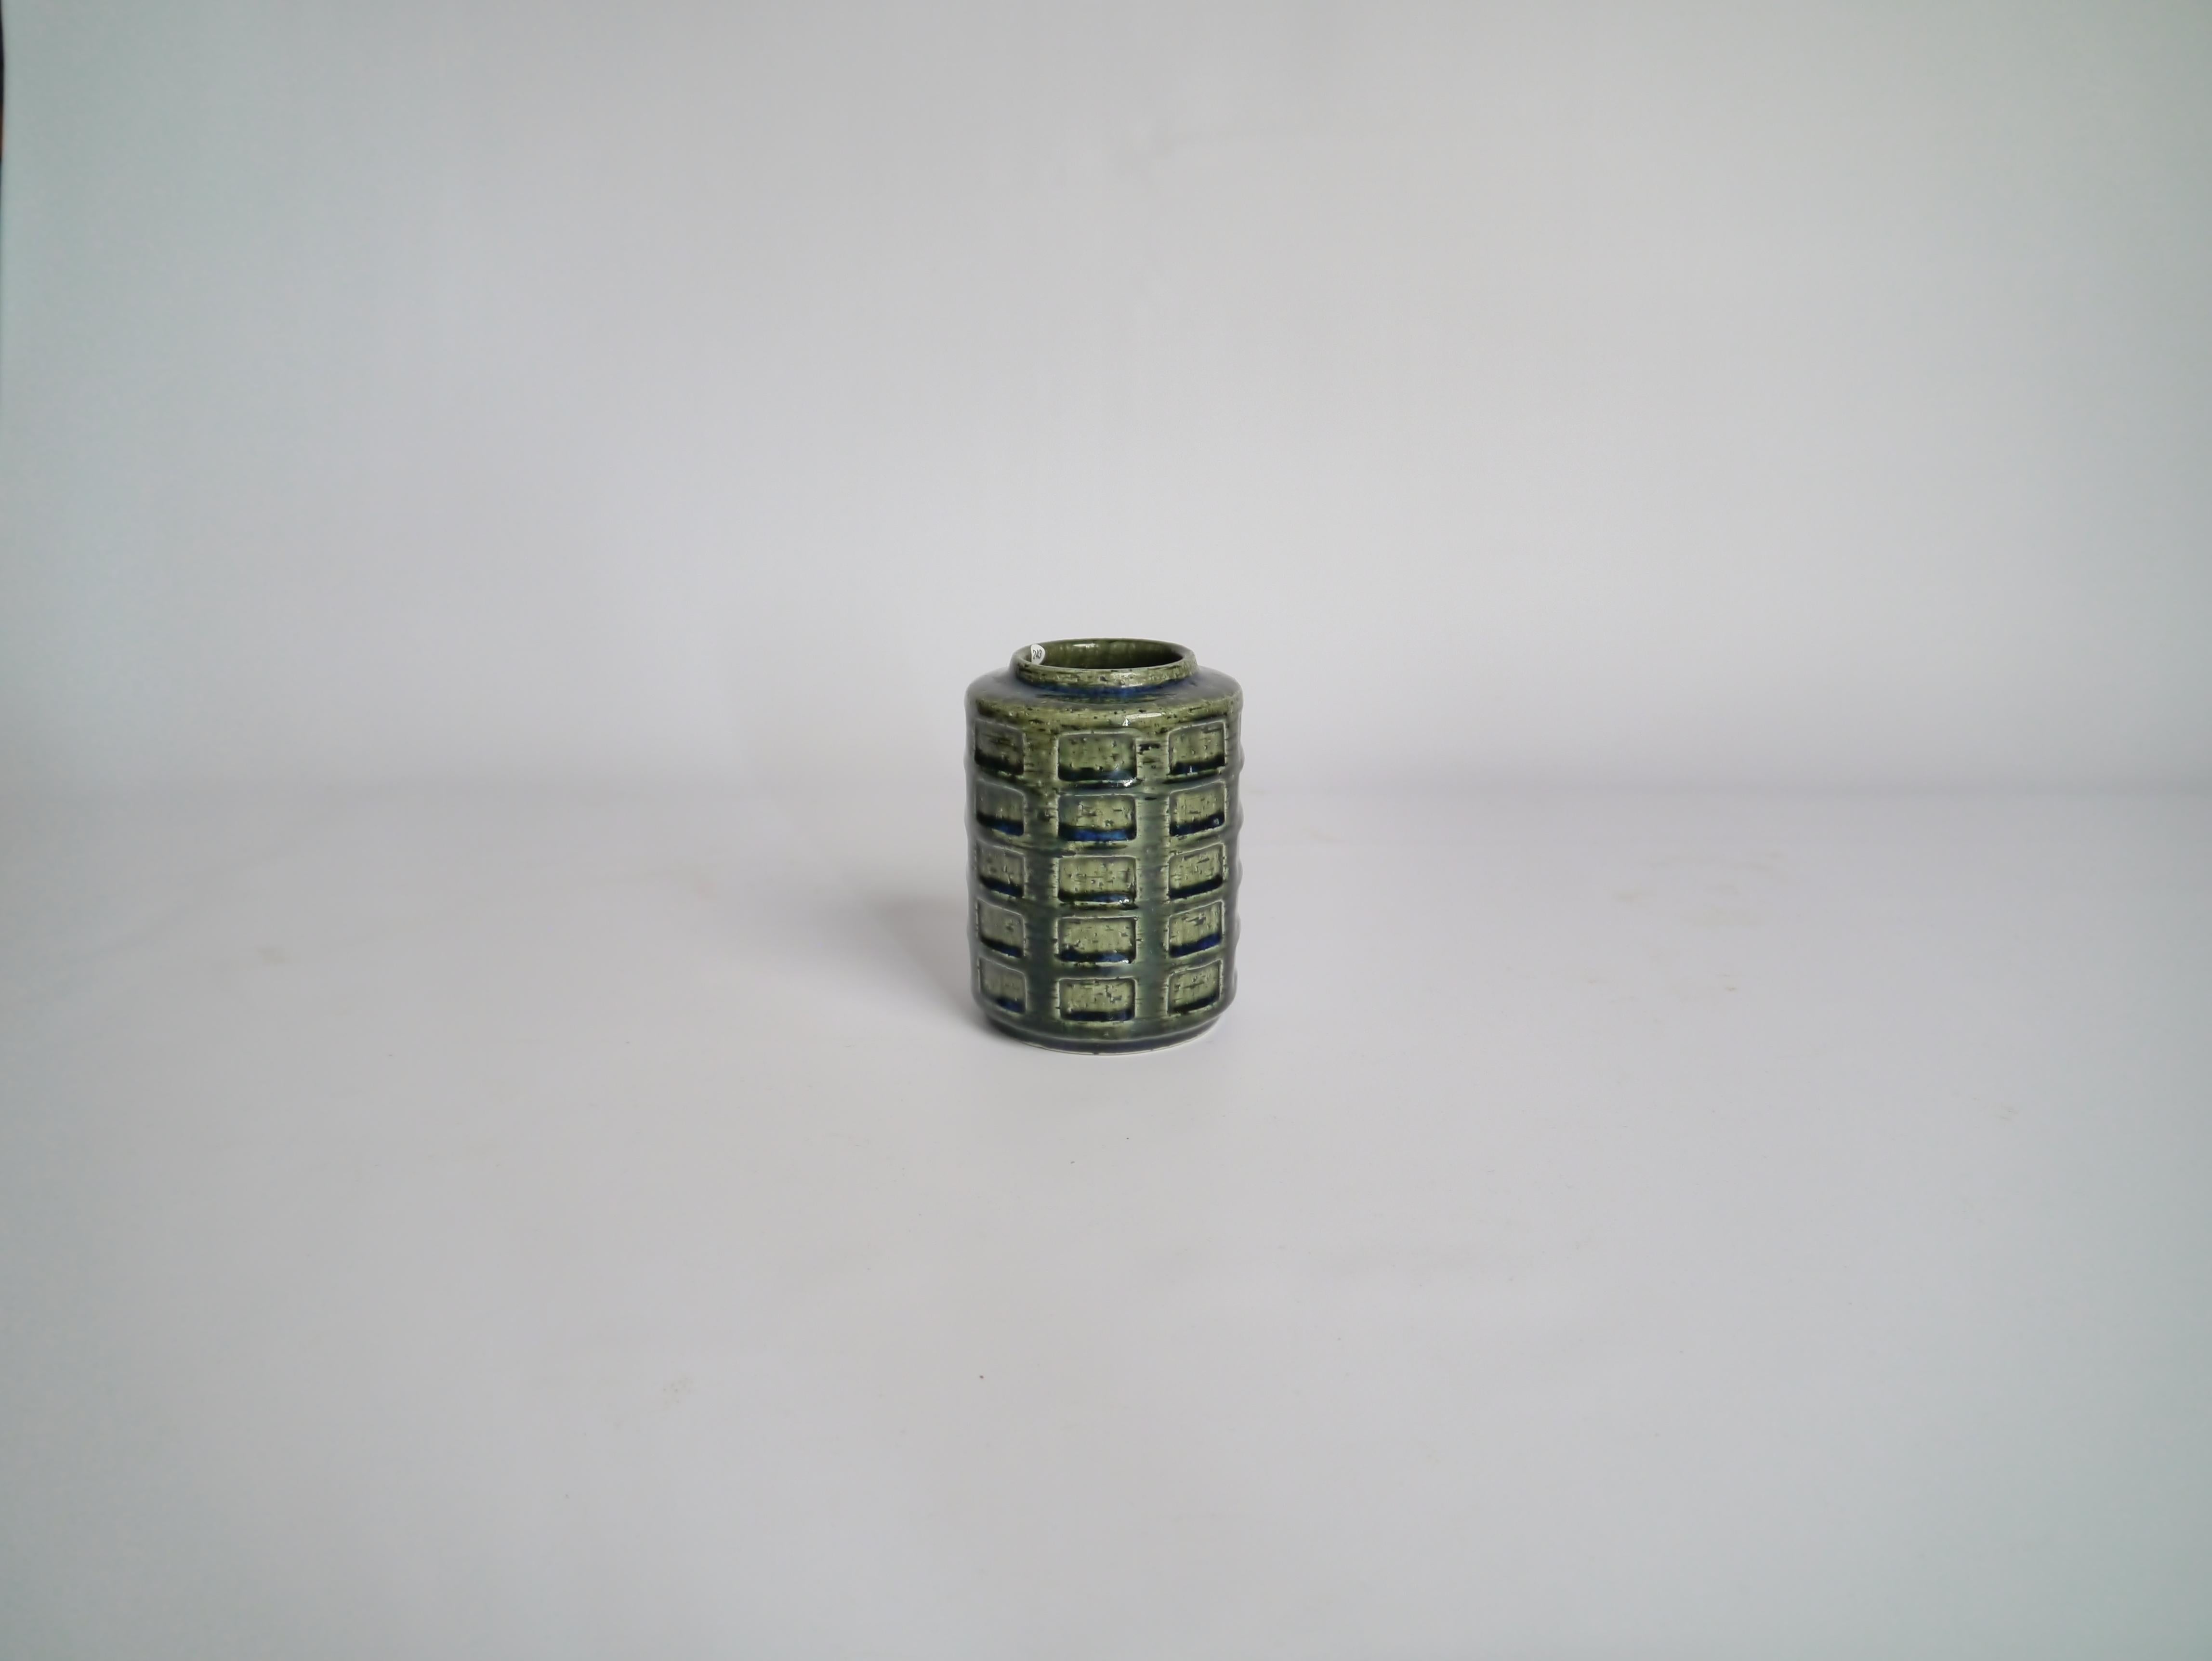 Glazed ceramic vase designed by Annelise and Per Linemann-Schmidt for Palshus, Denmark, 1960s. Rich shiny green-blue glaze & clean and repetitive architectonic pattern makes this little vase an eyecatcher.